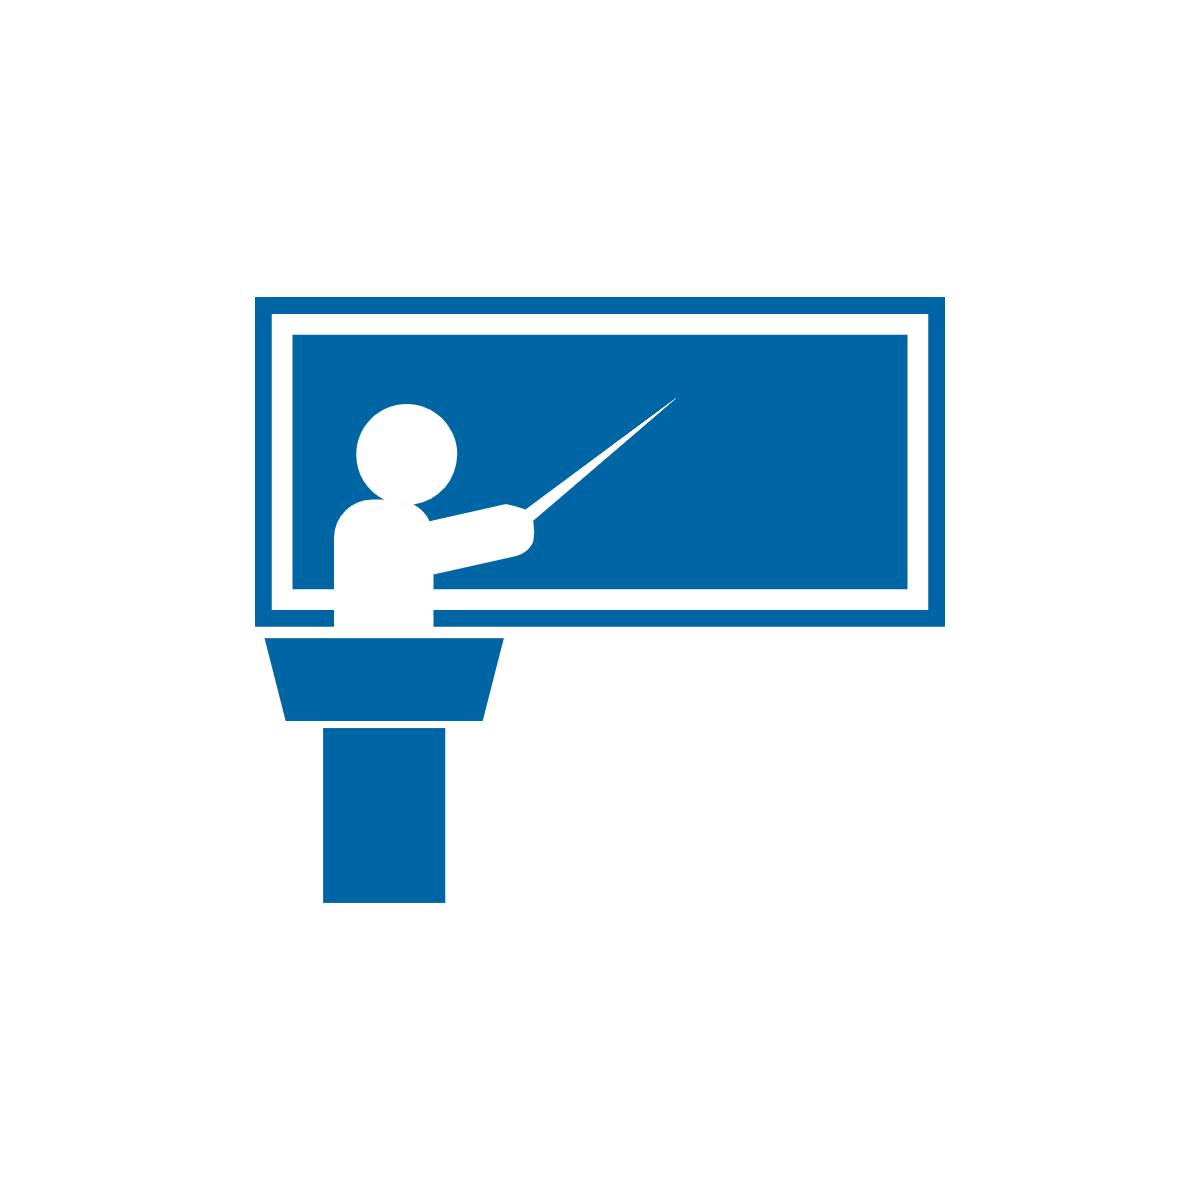 Stick figure person standing at a podium and pointing to a presentation screen--image represents the act of teaching.